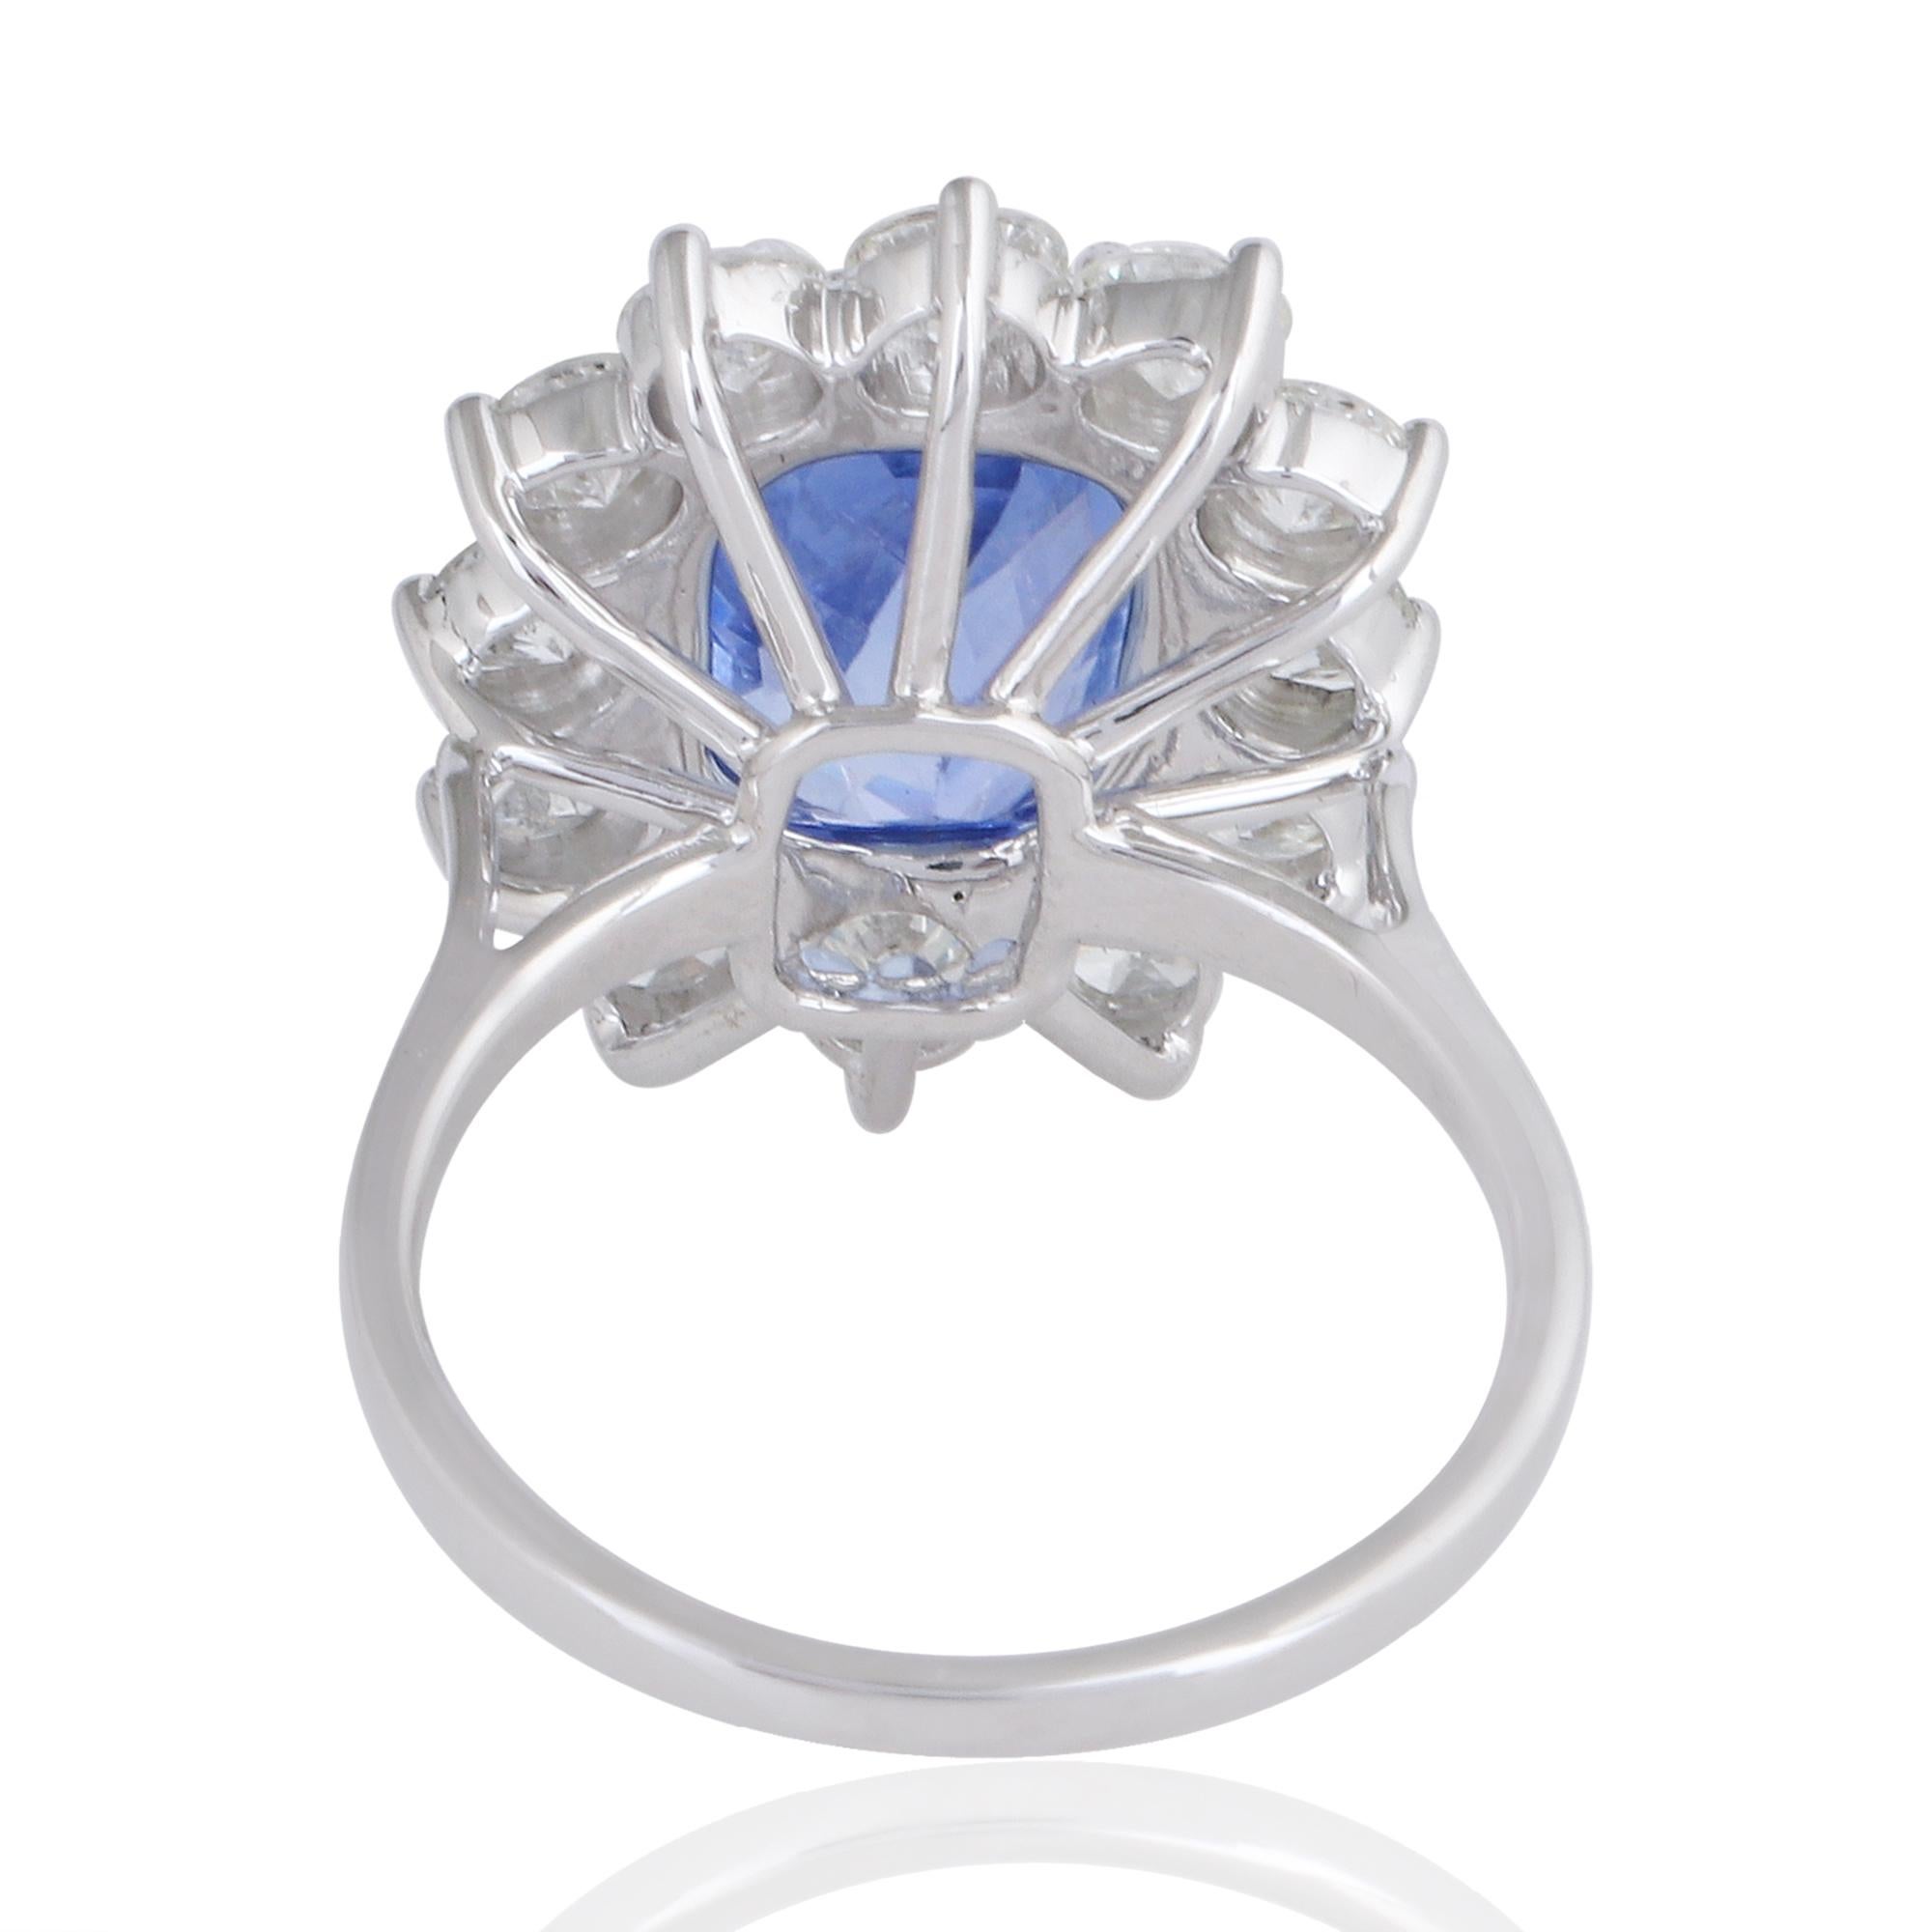 For Sale:  Blue Sapphire Gemstone Cocktail Ring Diamond 18 Kt White Gold Handmade Jewelry 2